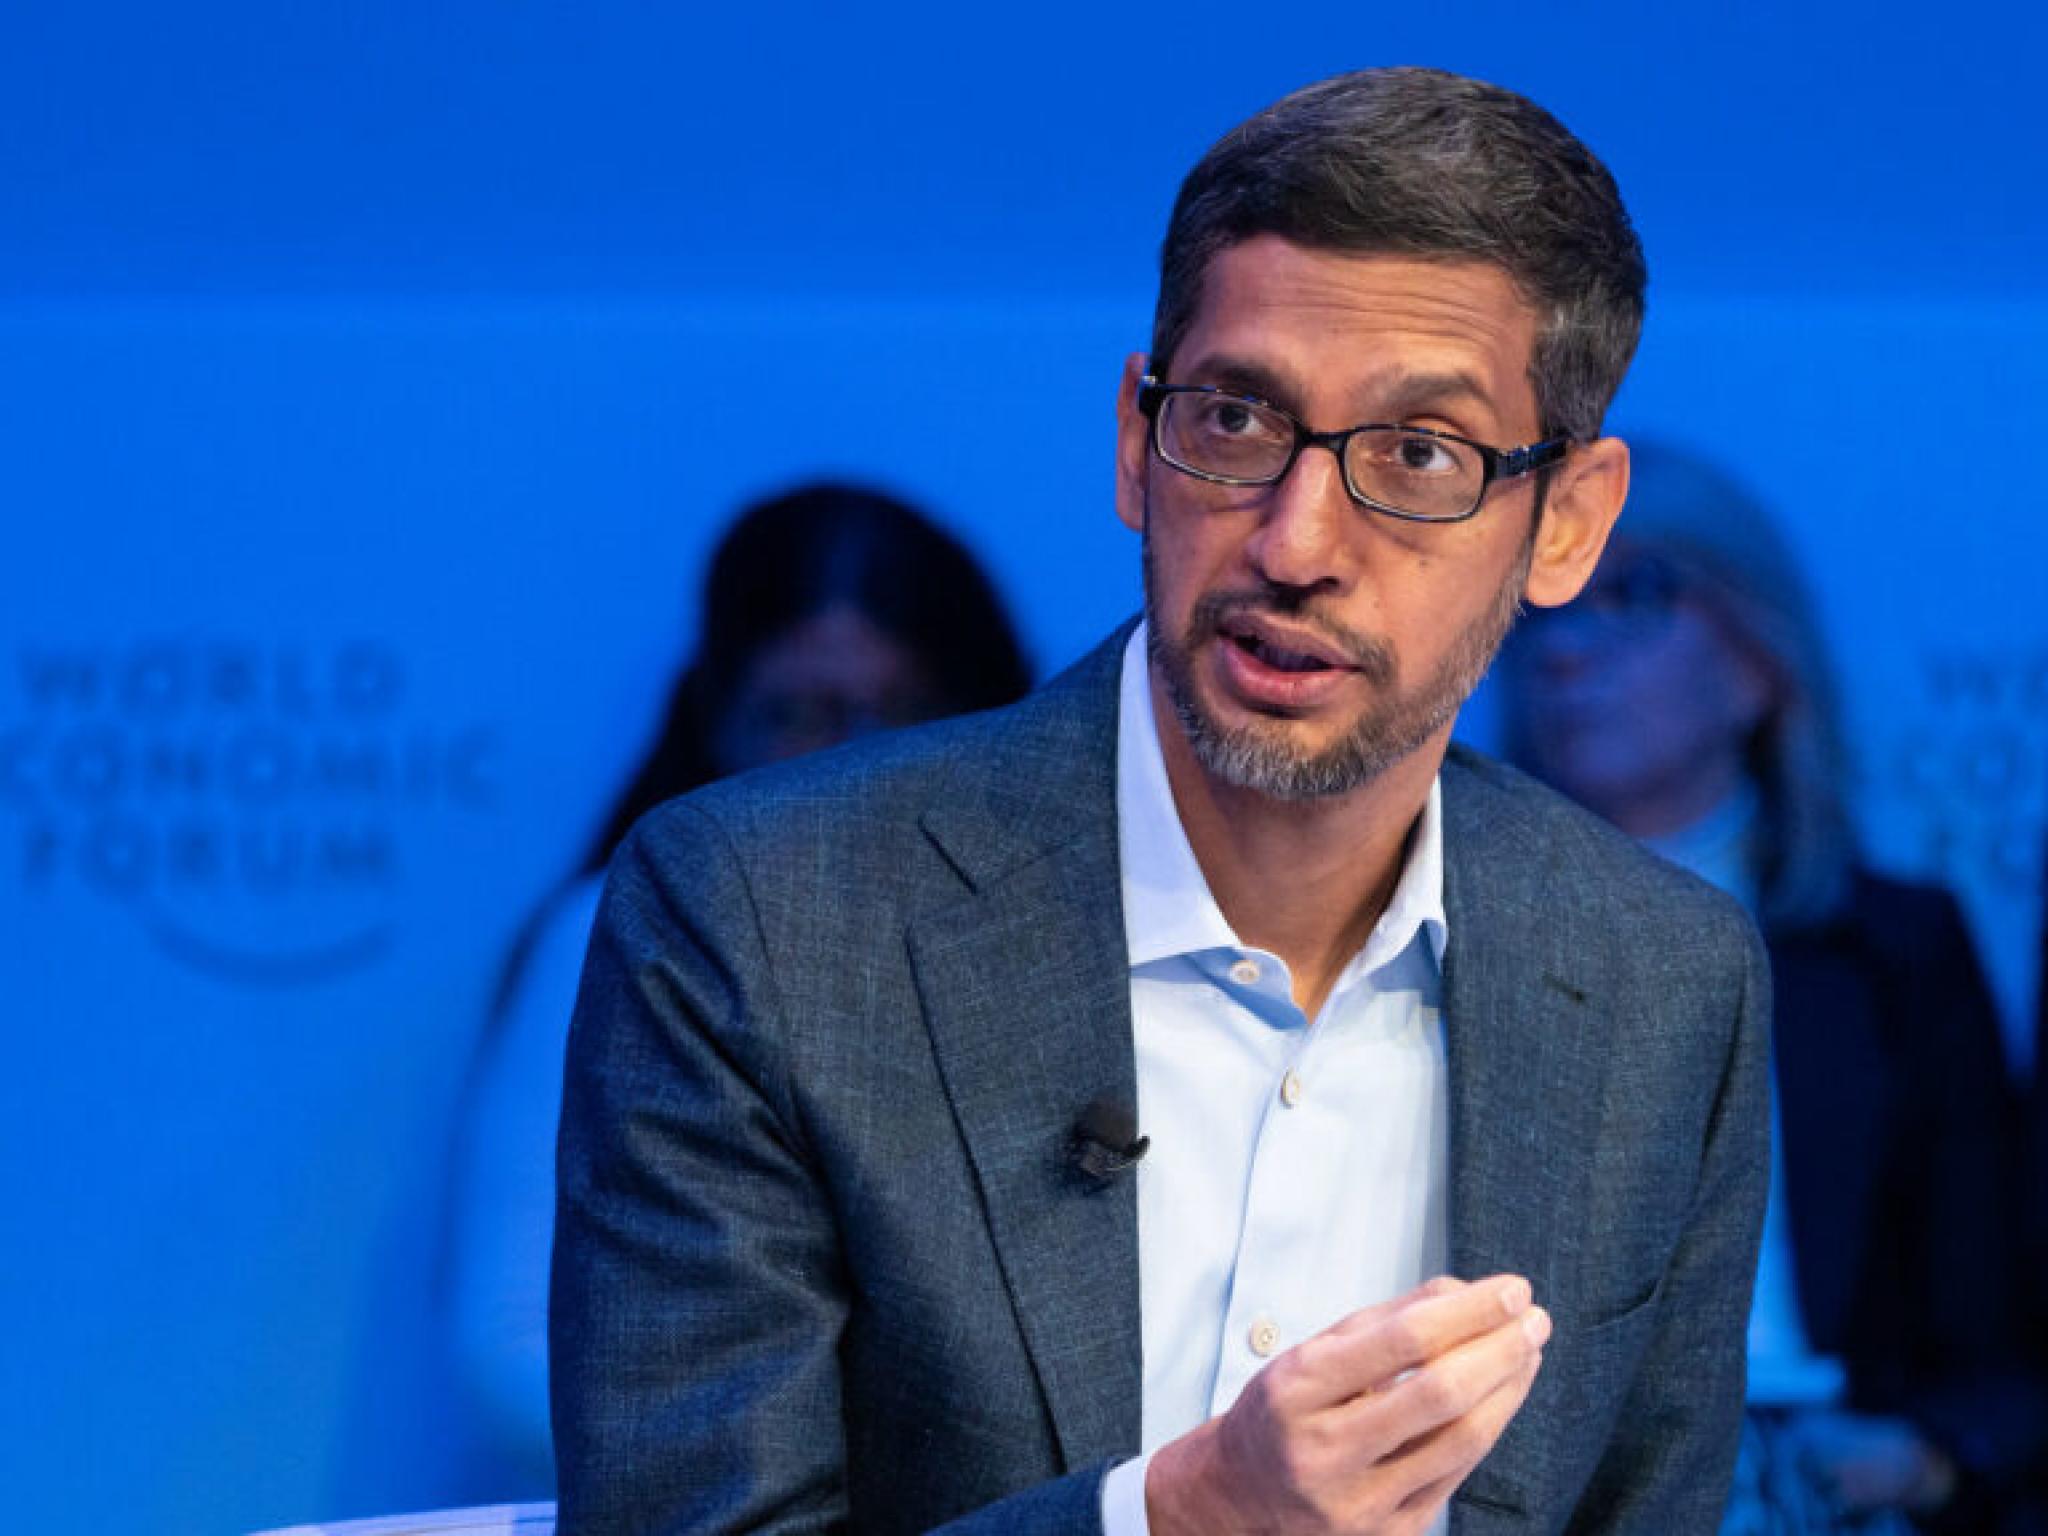  google-ceo-sundar-pichai-says-computers-assisting-humans-in-driving-is-obvious-as-uber-moves-closer-to-self-driving-fleet 